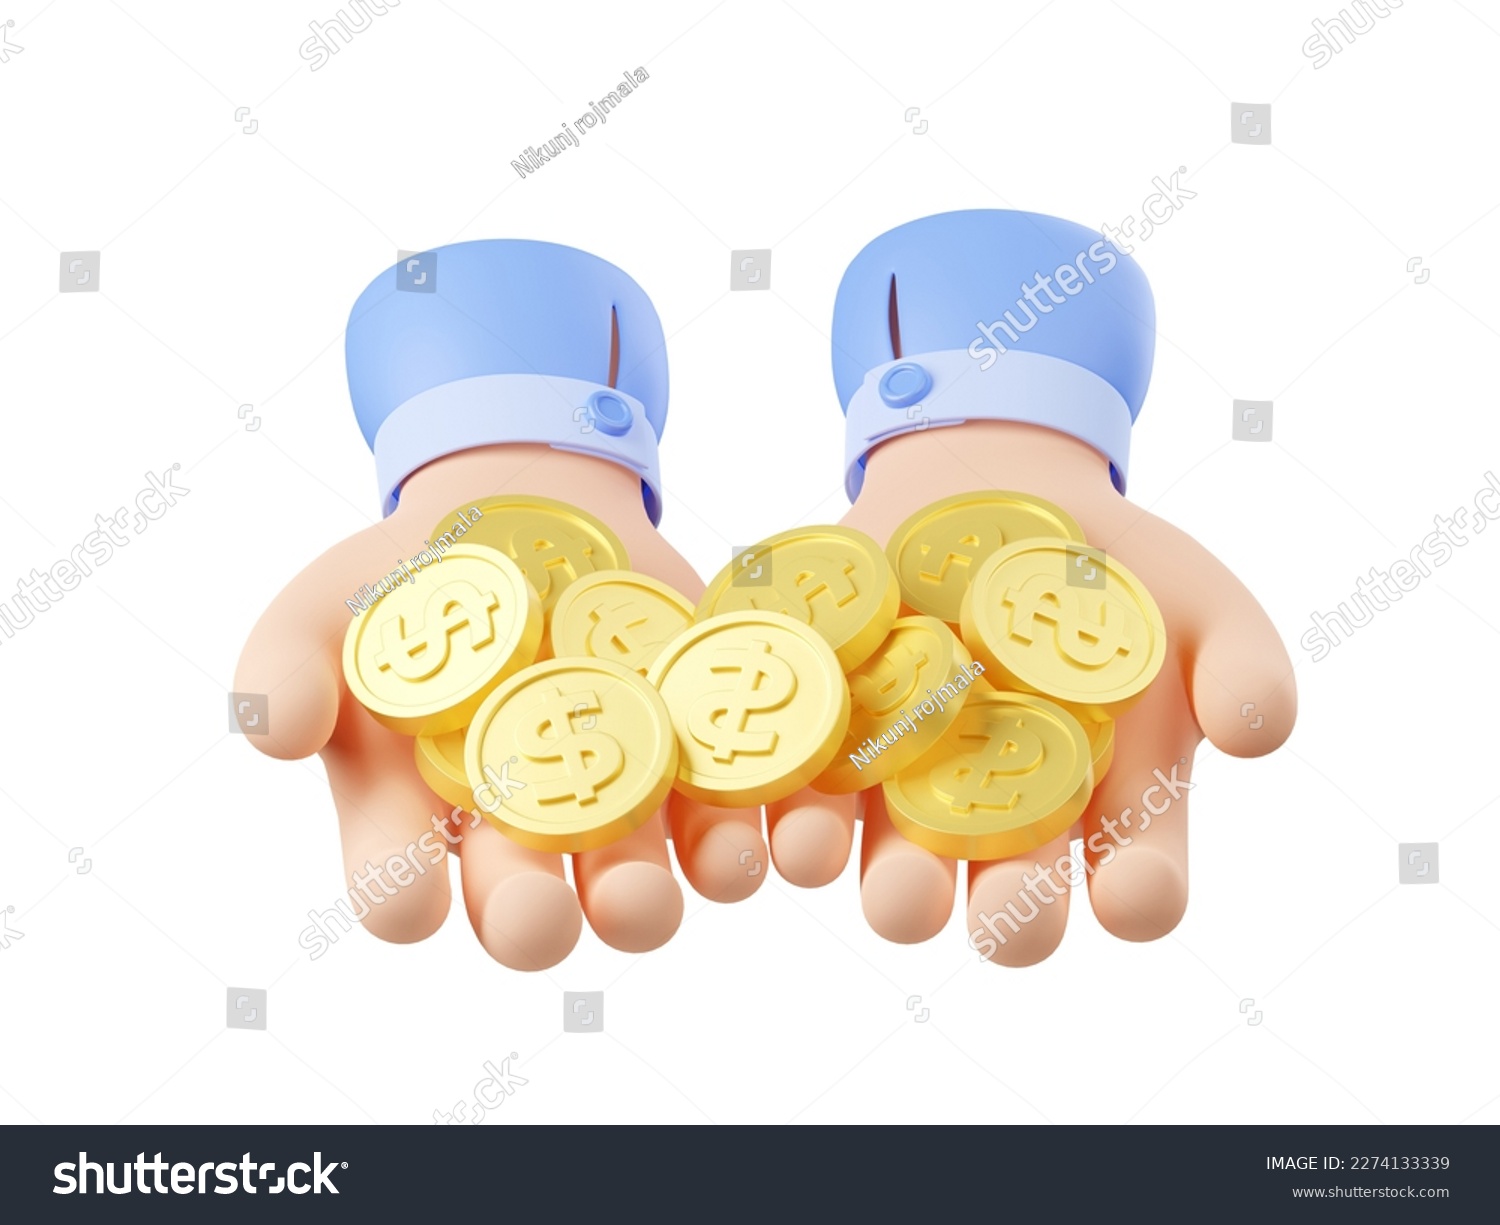 SVG of Two hands with pile of gold coins. Concept of money cash, wealth, financial success, savings or charity. Heap of dollar coins on human palms, 3d render illustration isolated on white background svg